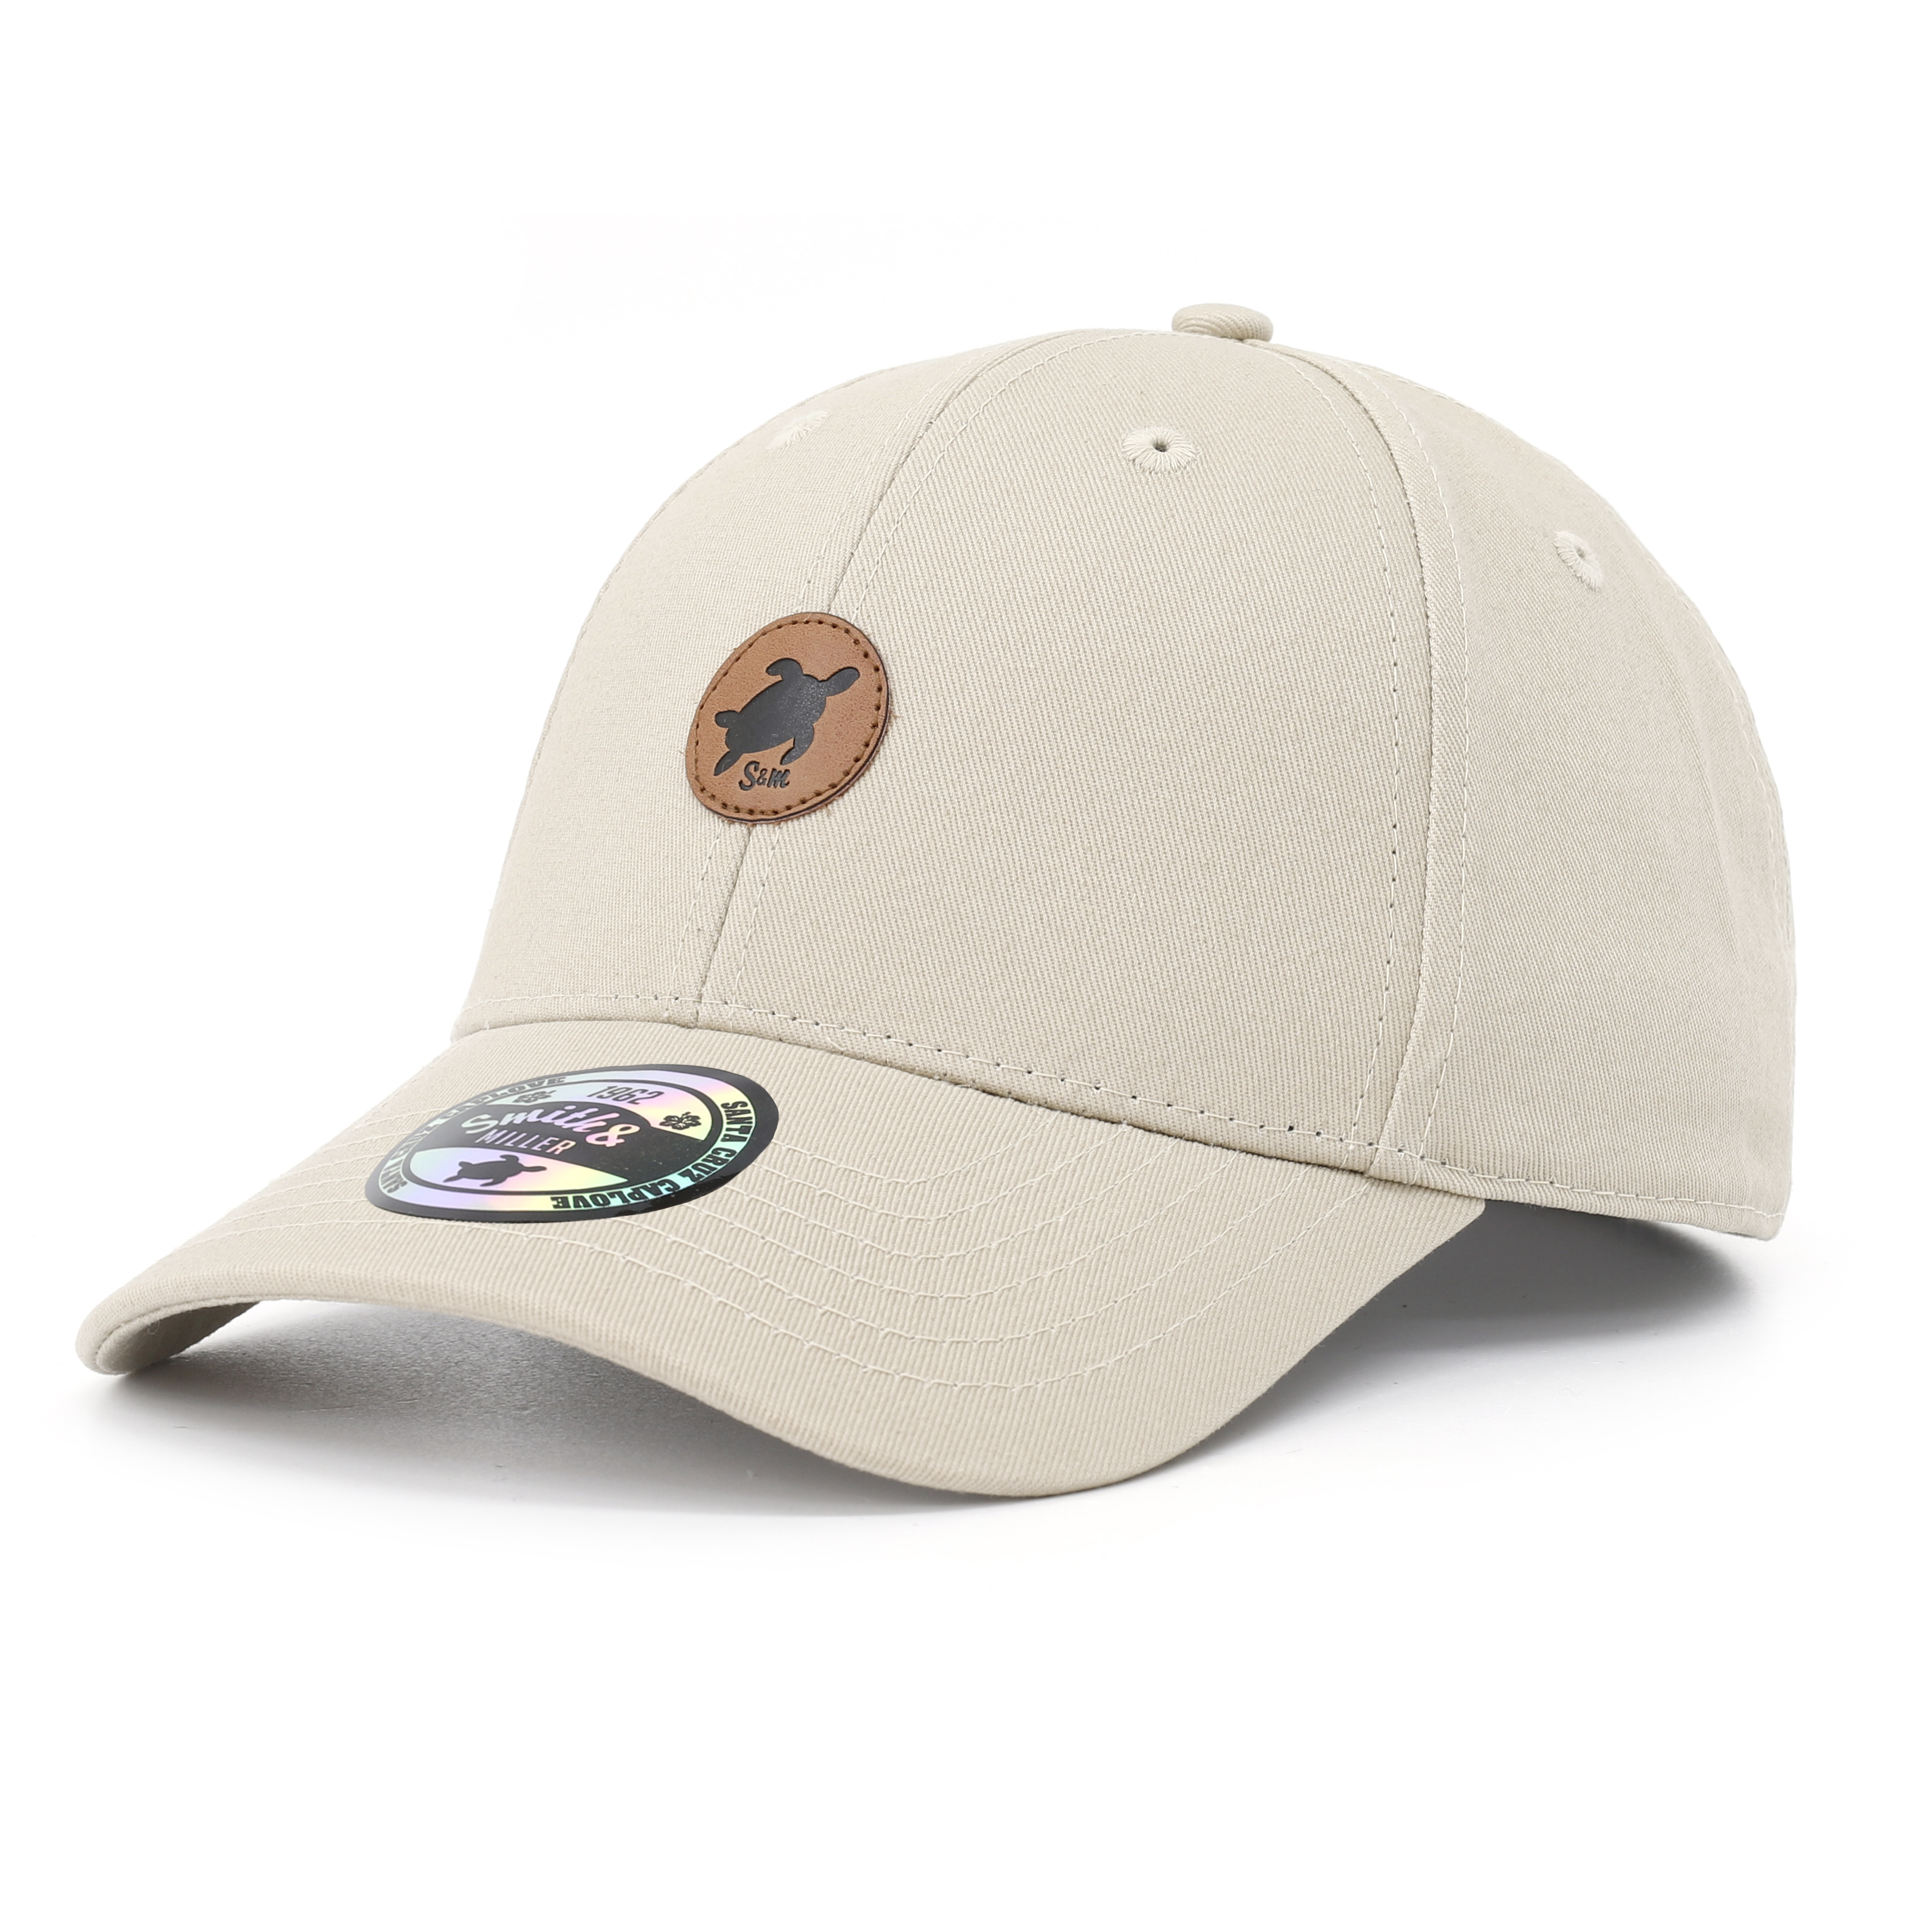 Smith & Miller Bend Unisex Curved Cap, stone